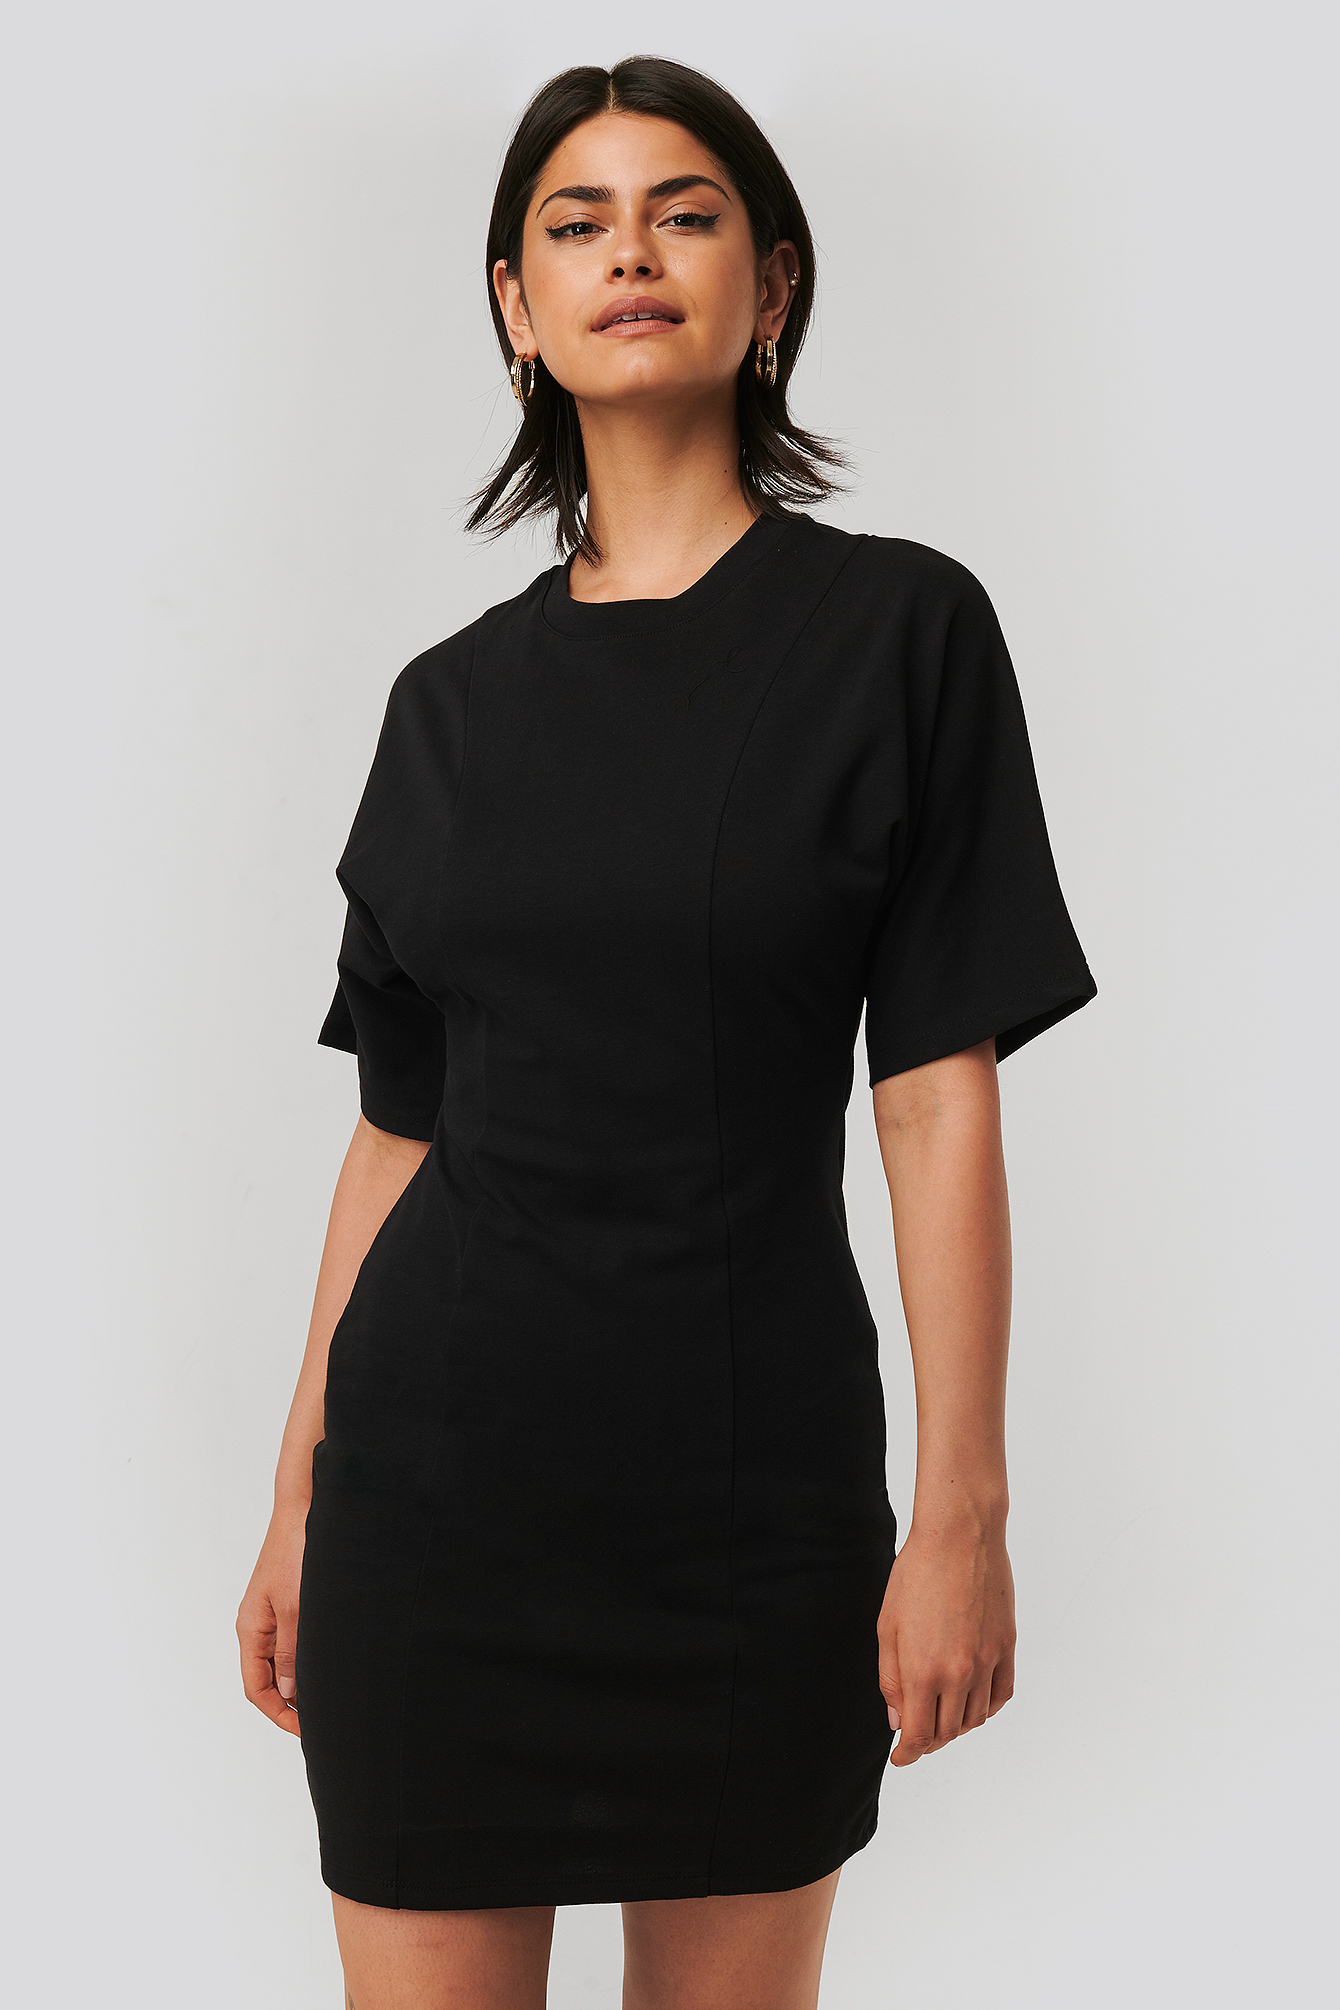 Black Fitted T-shirt Dress